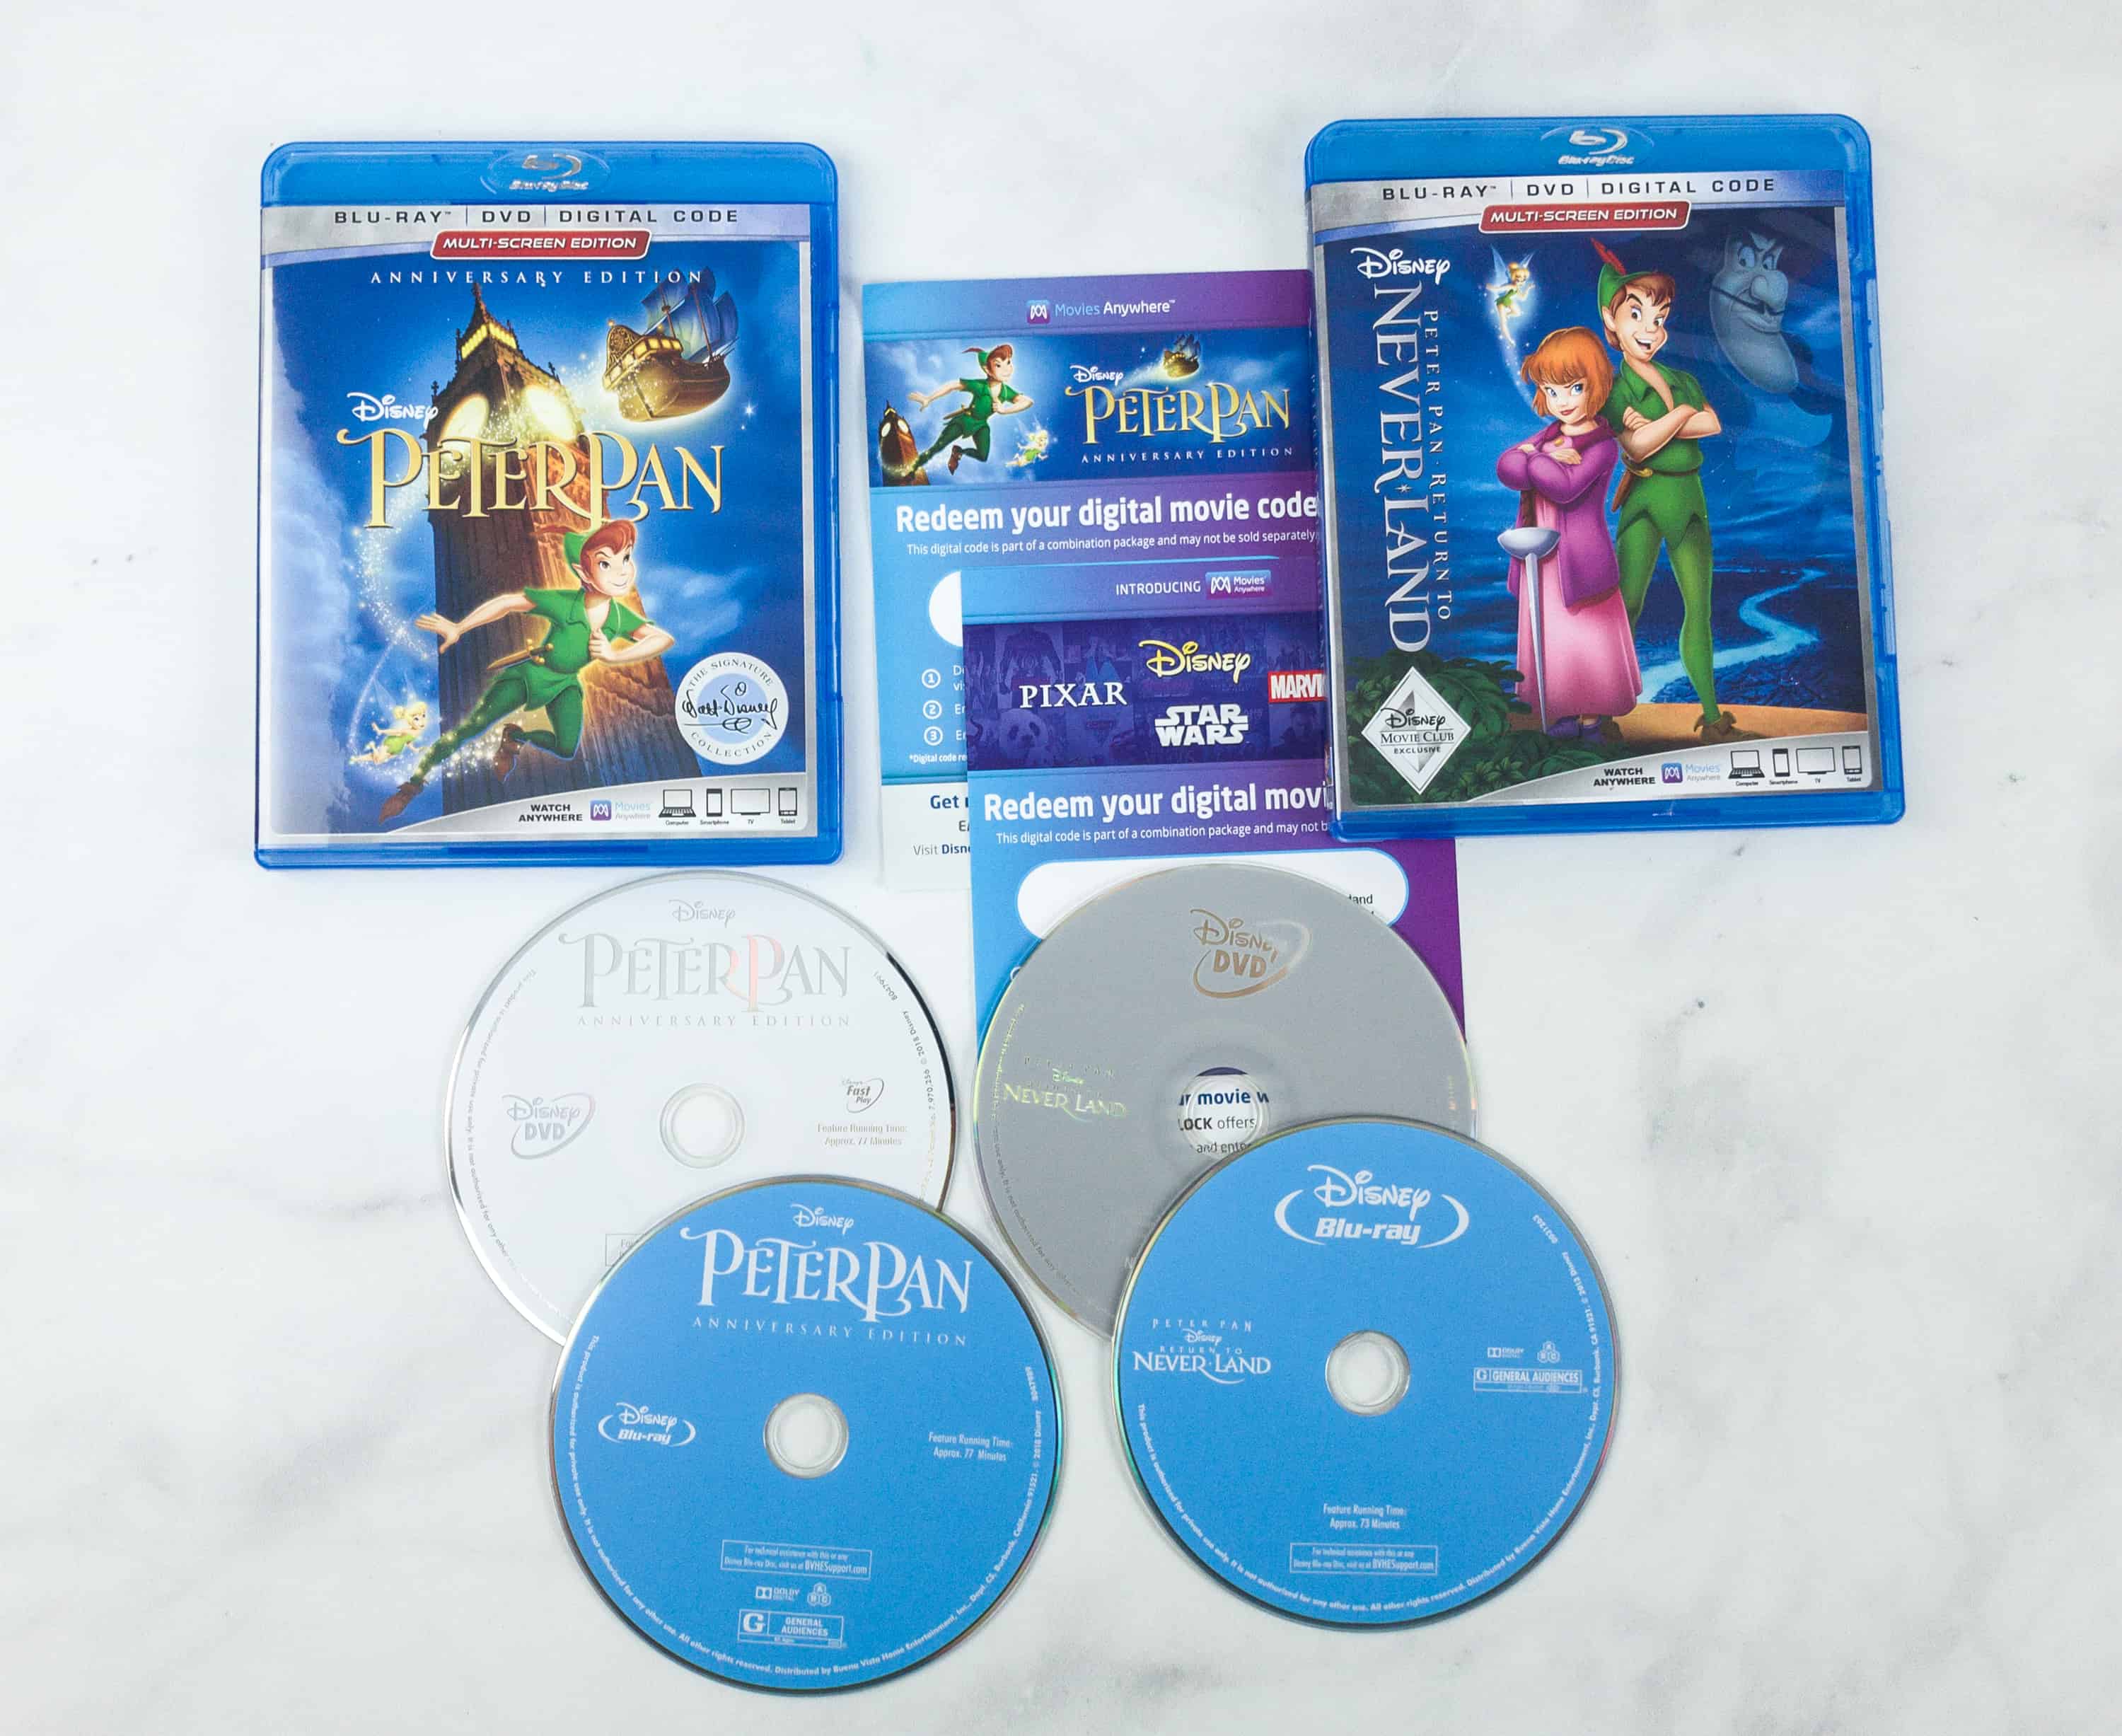 where is the disney digital copy code from the physical copy